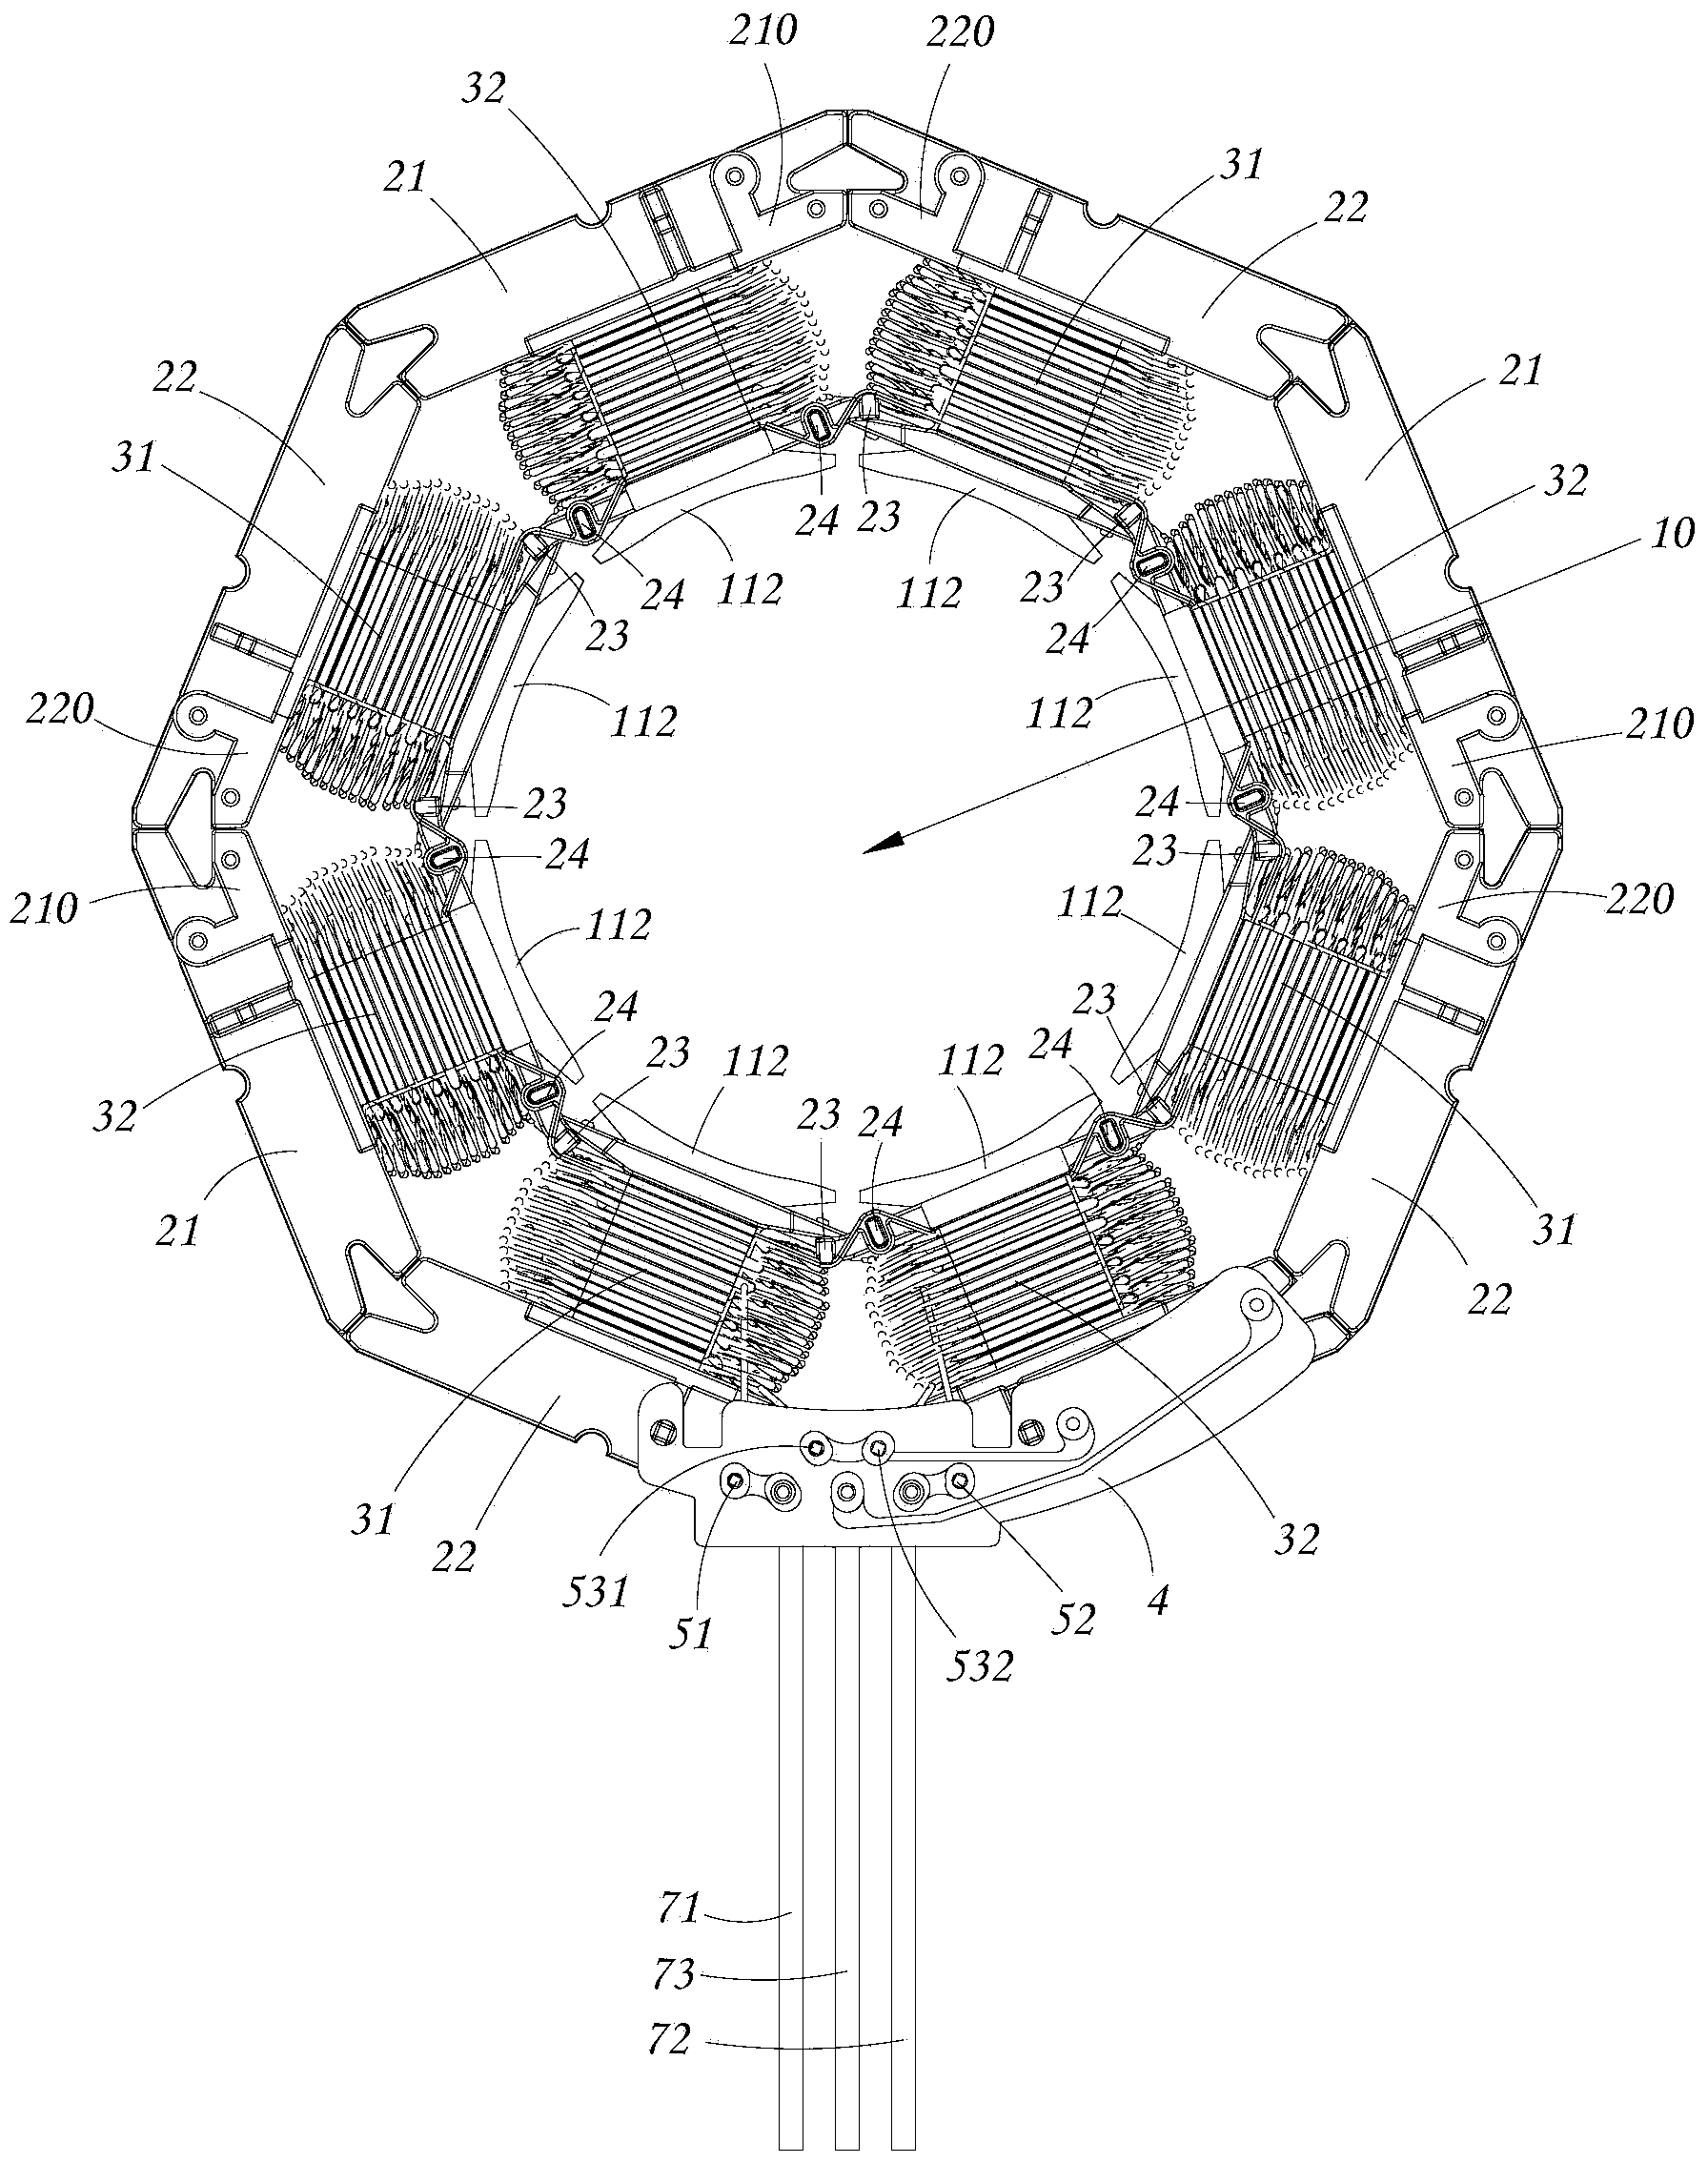 Motor stator assembly and assembling method thereof, and motor